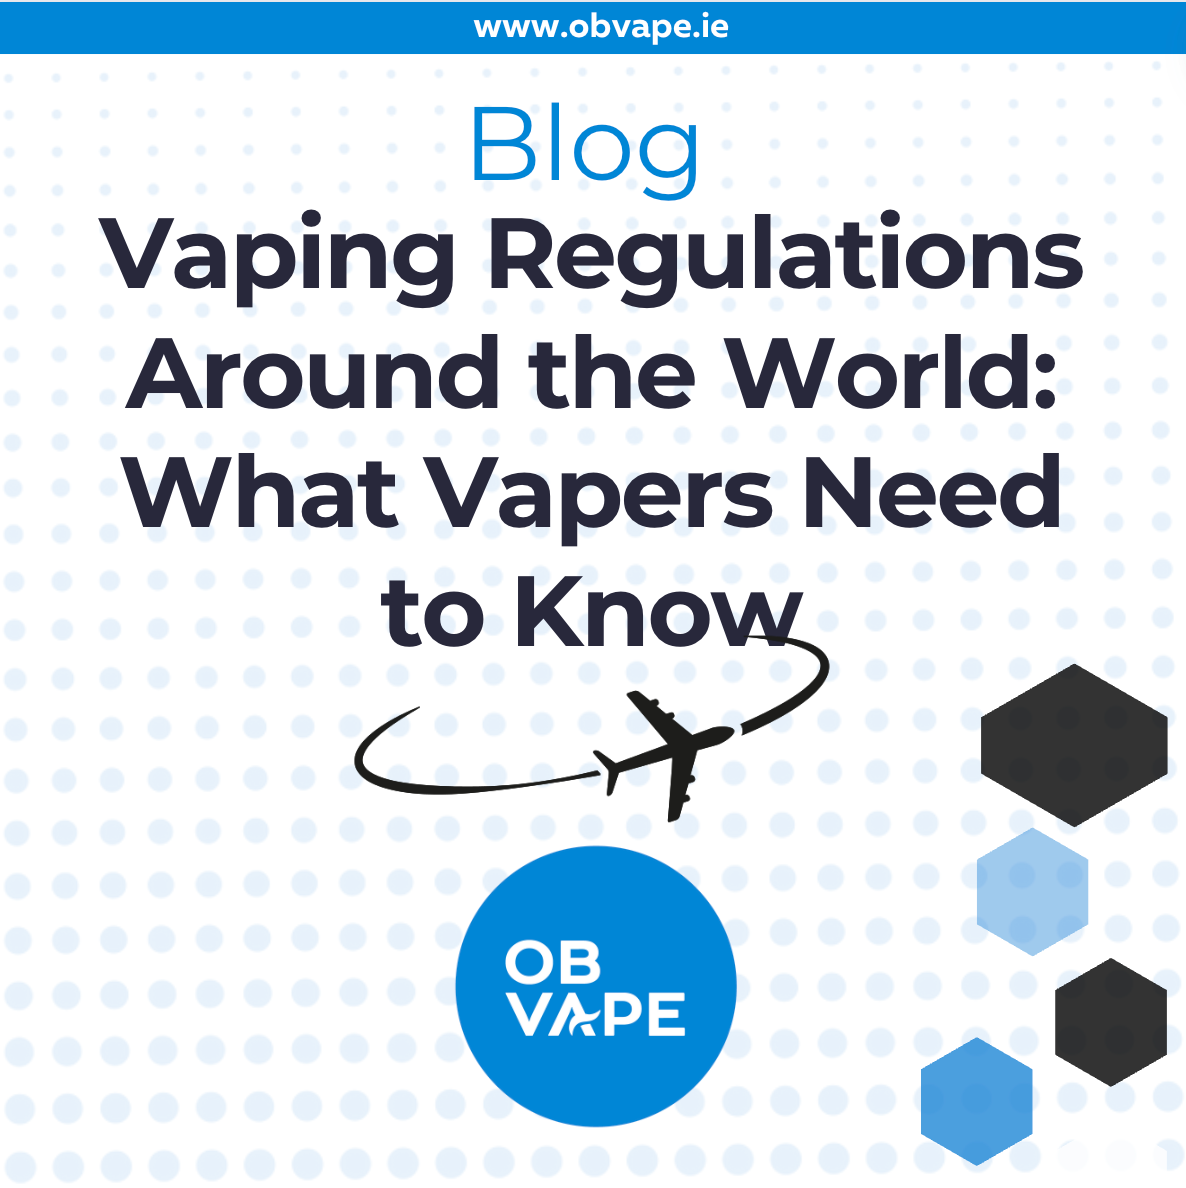 Vaping Regulations Around the World: What Vapers Need to Know